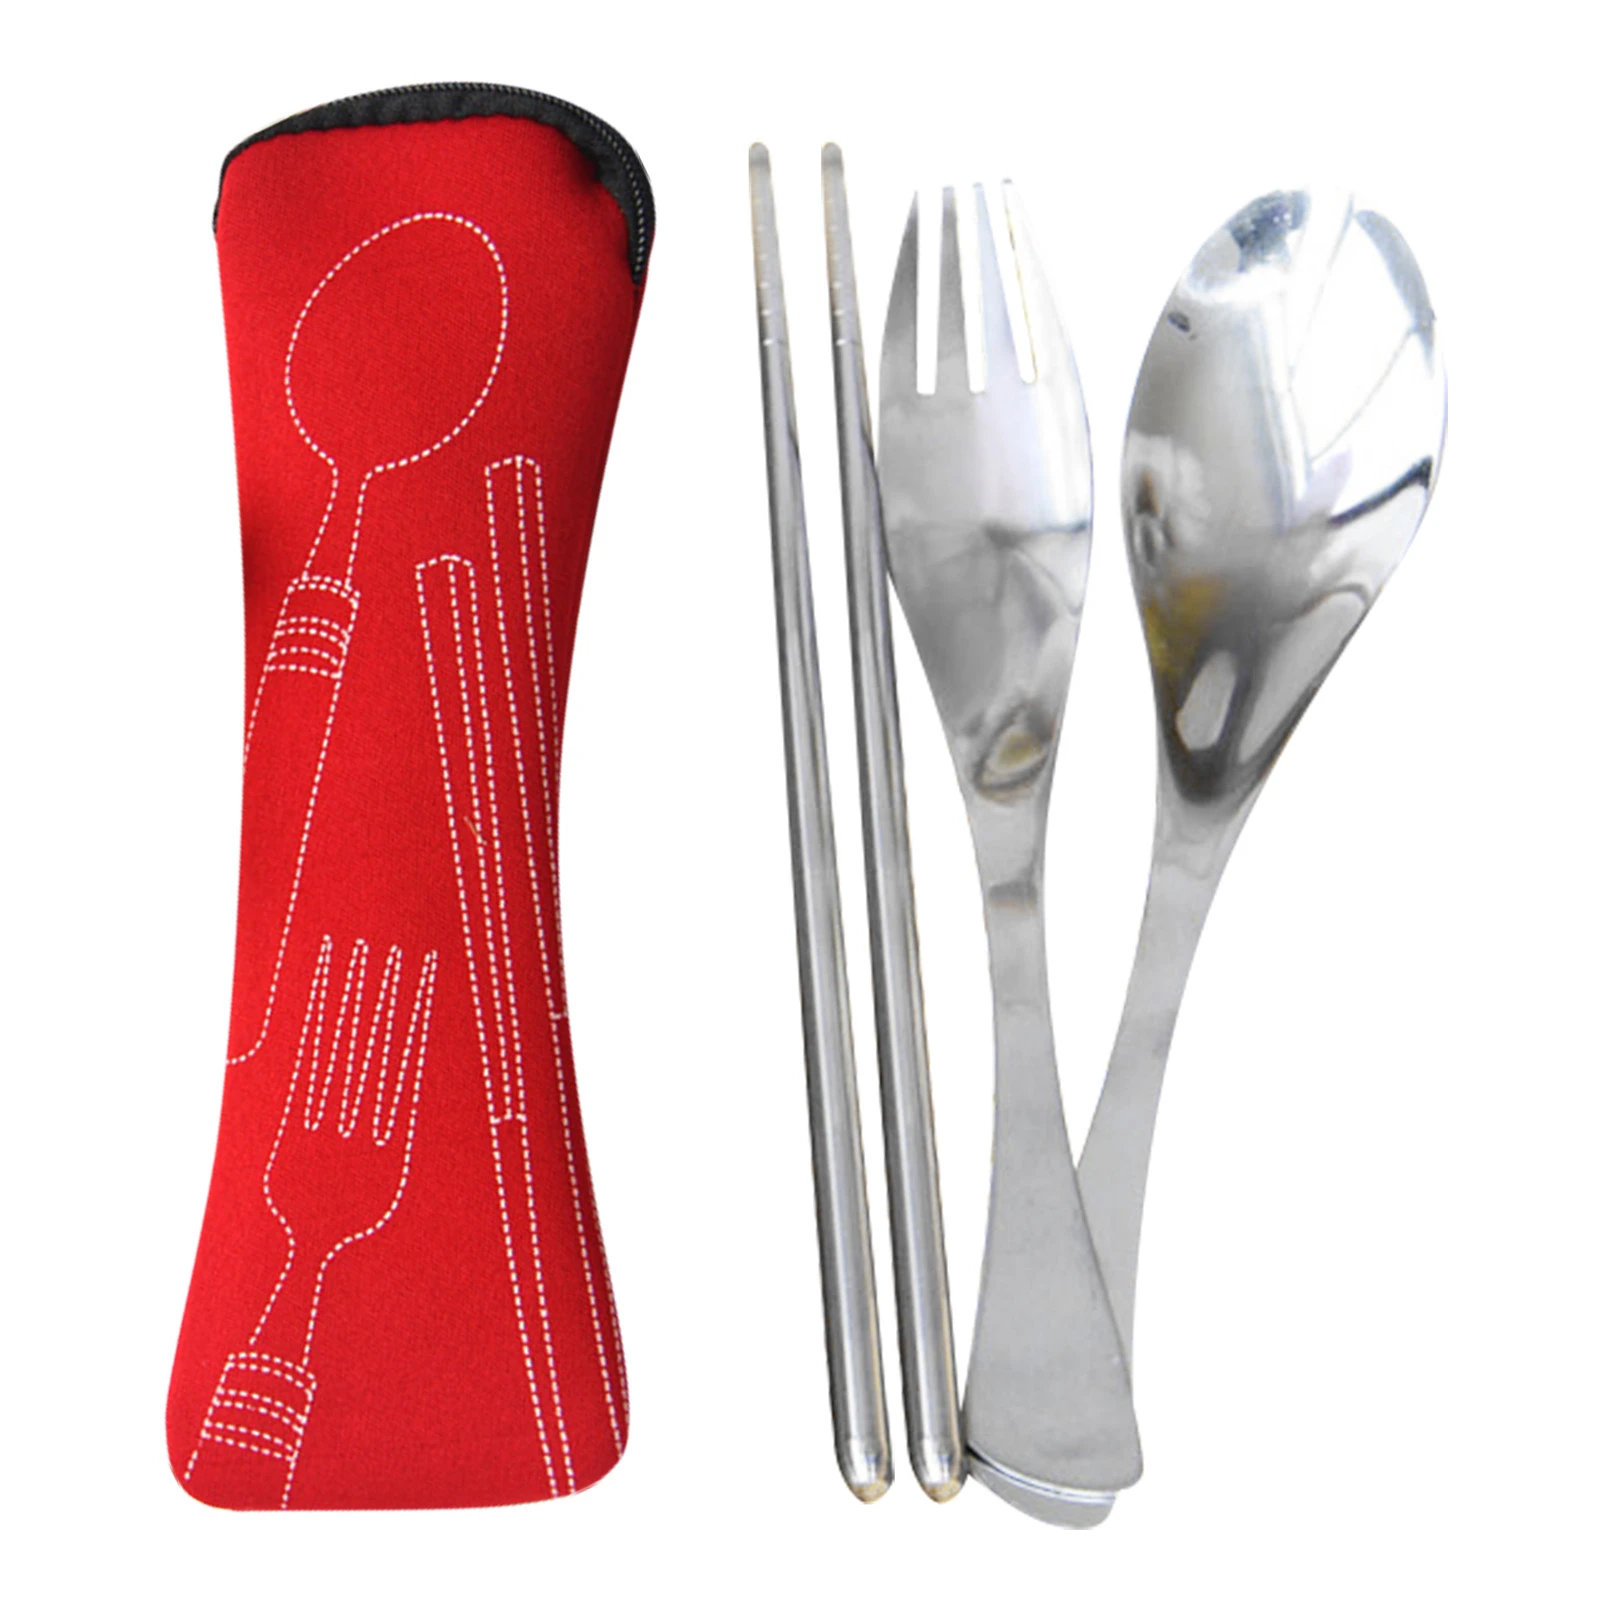 3pcs Stainless Steel Knifes Fork Spoon Set Family Travel Tableware Camping  Cutlery Cloth Bag Three piece Portable Cutlery Set| | - AliExpress